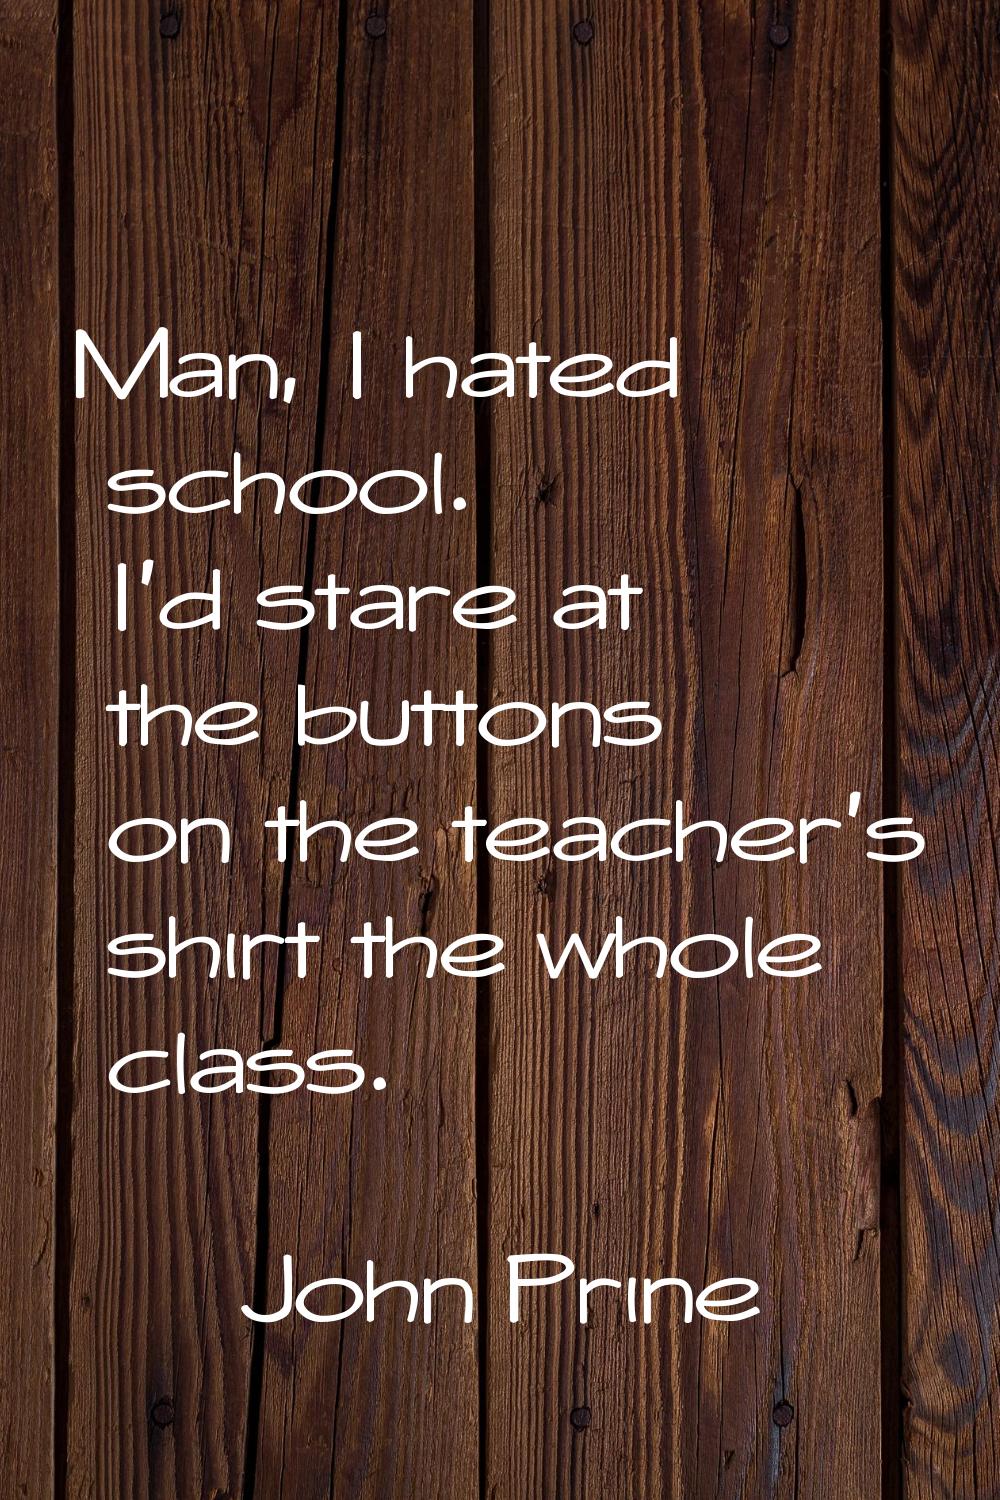 Man, I hated school. I'd stare at the buttons on the teacher's shirt the whole class.